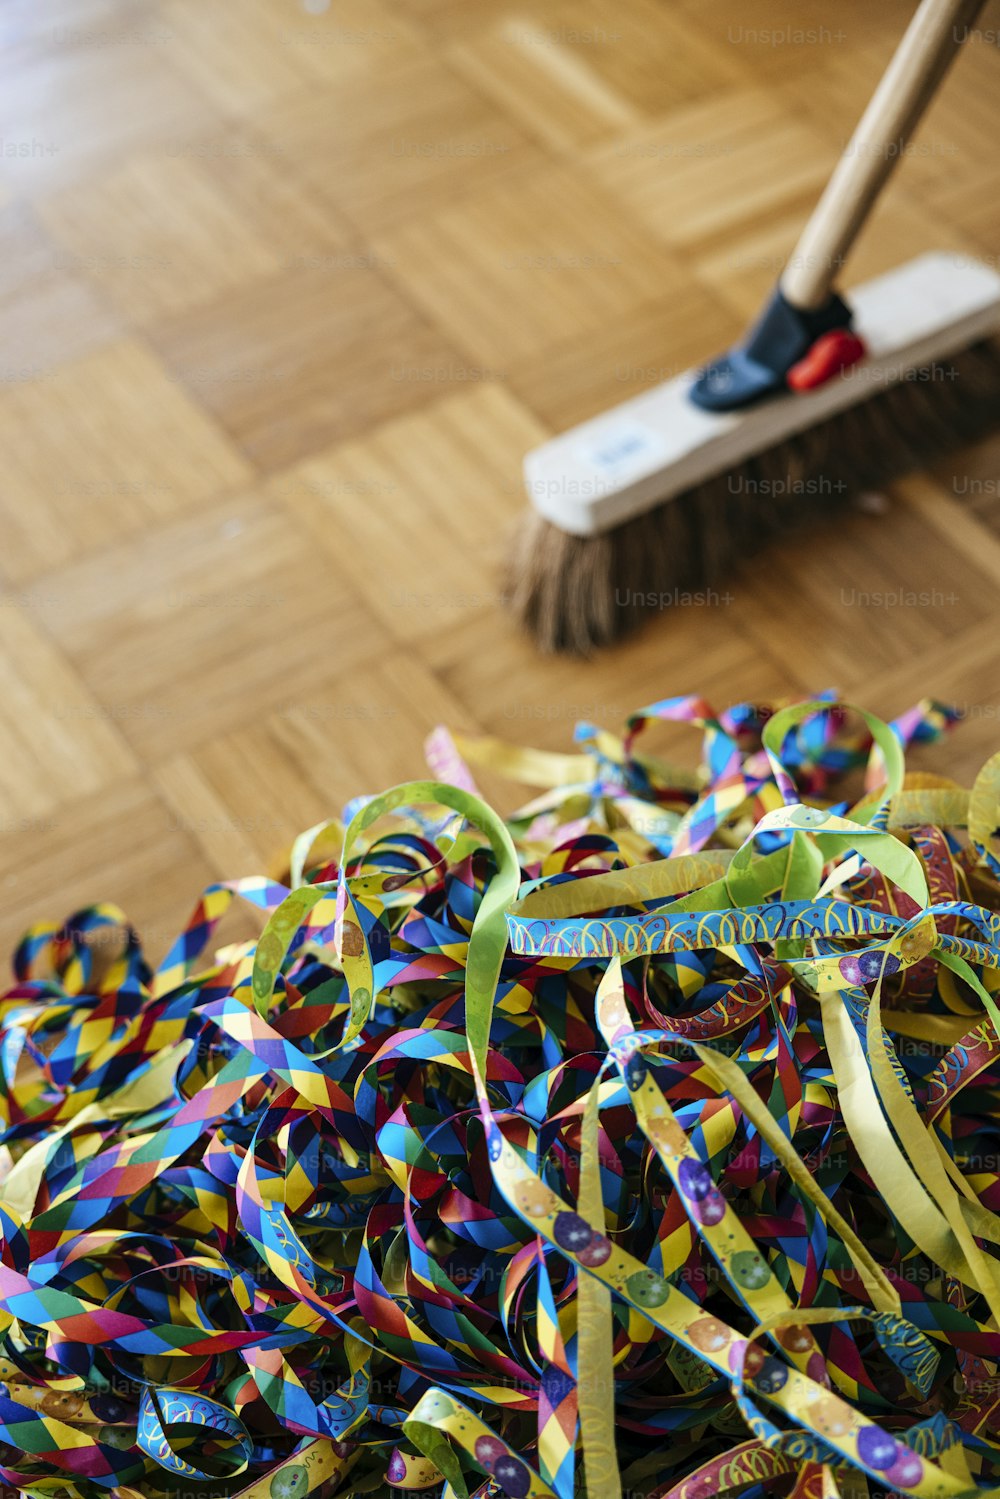 a broom and a pile of streamers on a hard wood floor